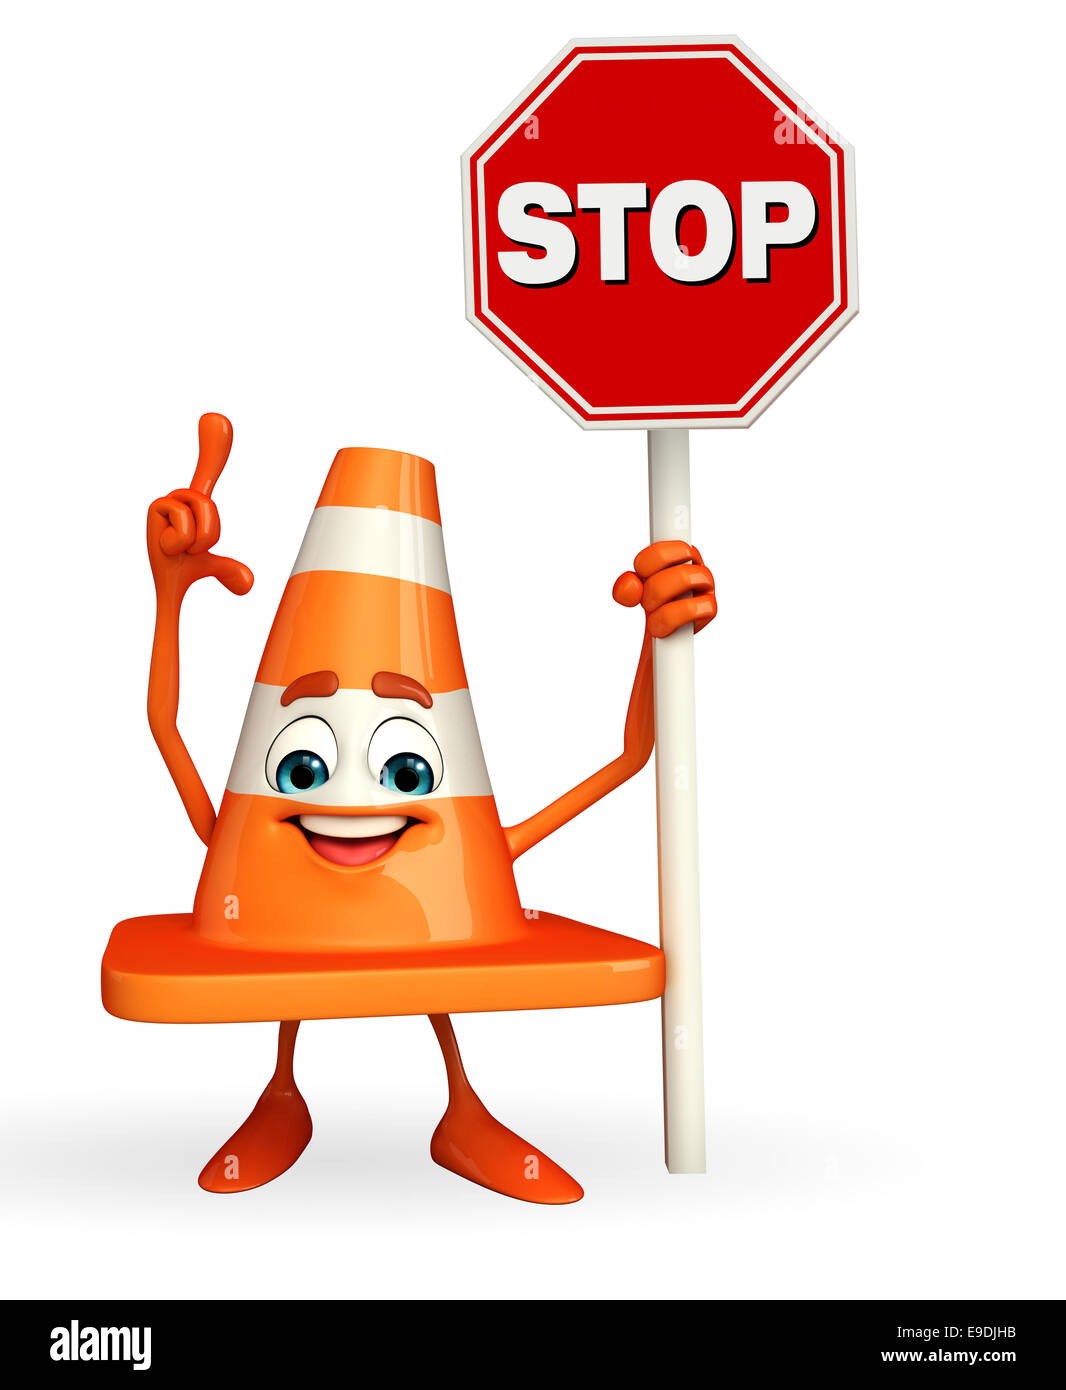 Cartoon Character Of Construction Cone With Stop Sign Stock Photo